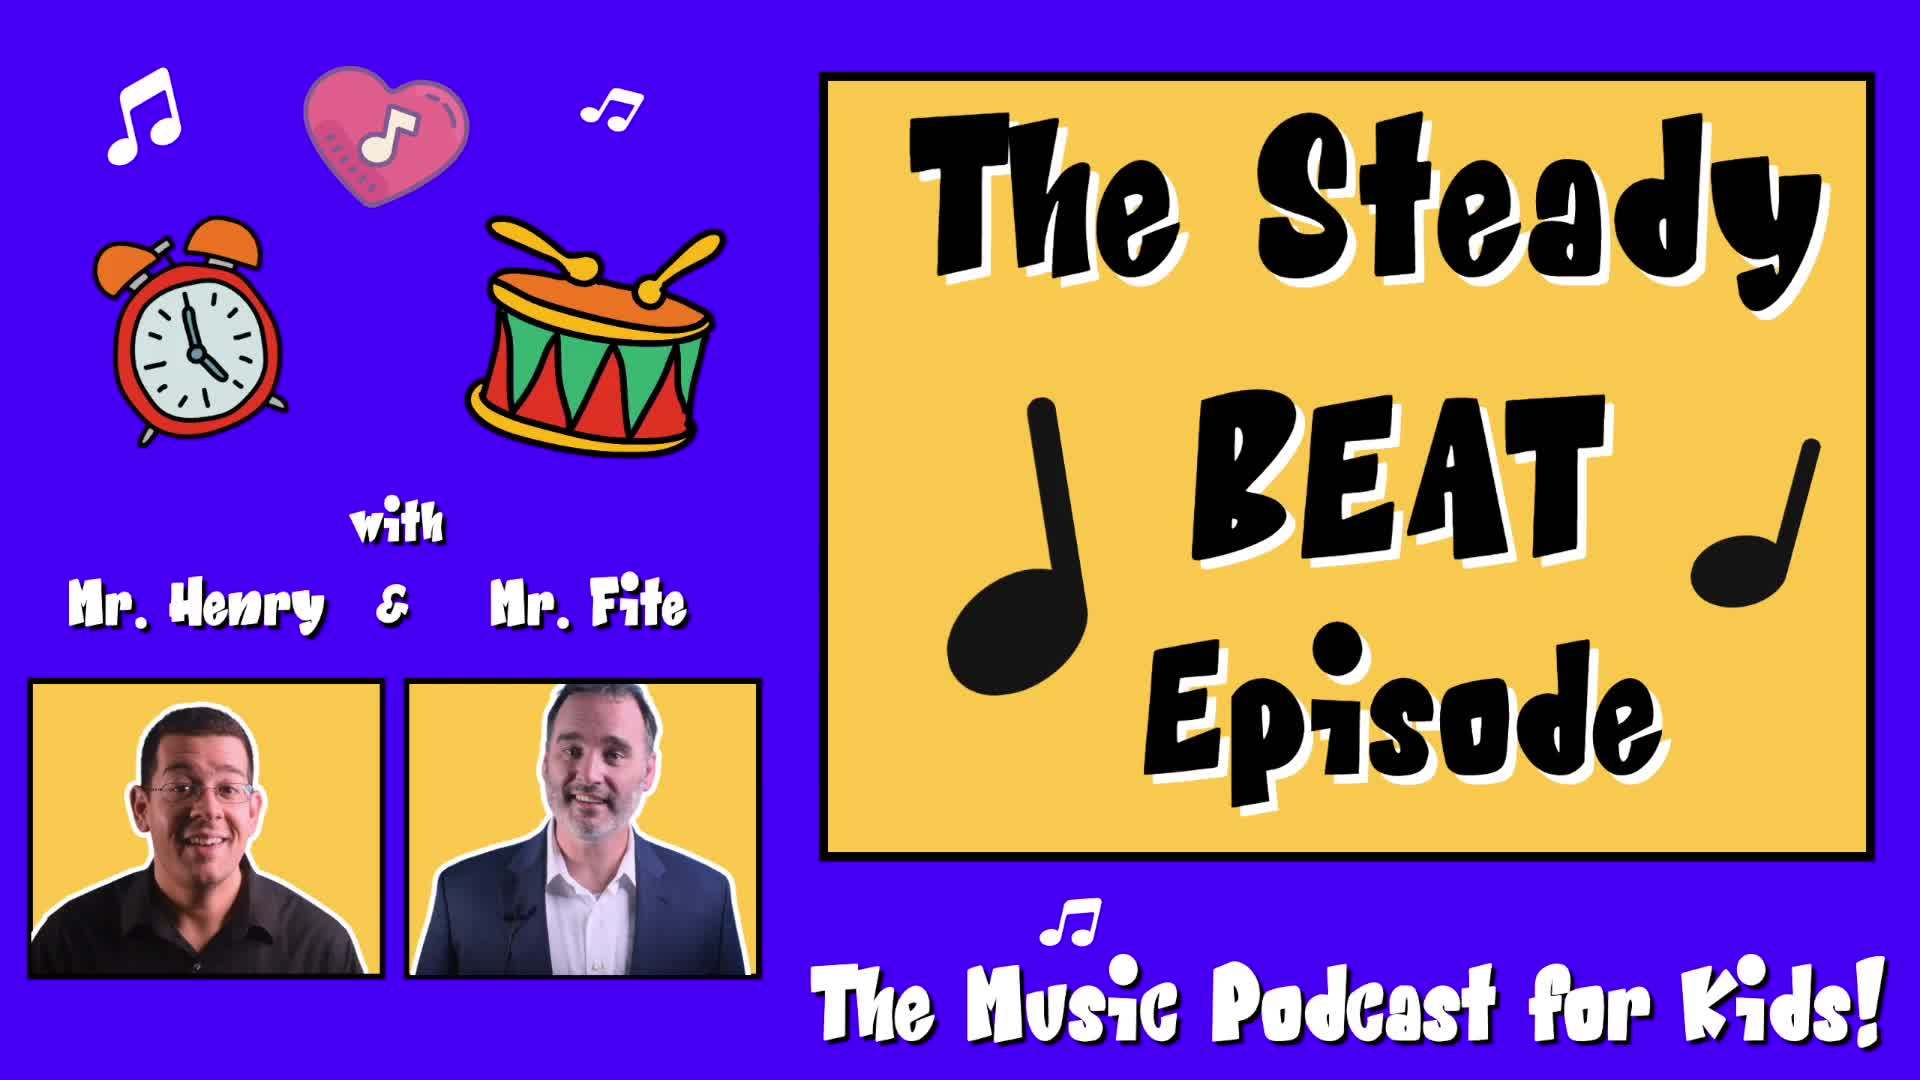 Steady Beat Lesson: All About Steady Beat Episode!